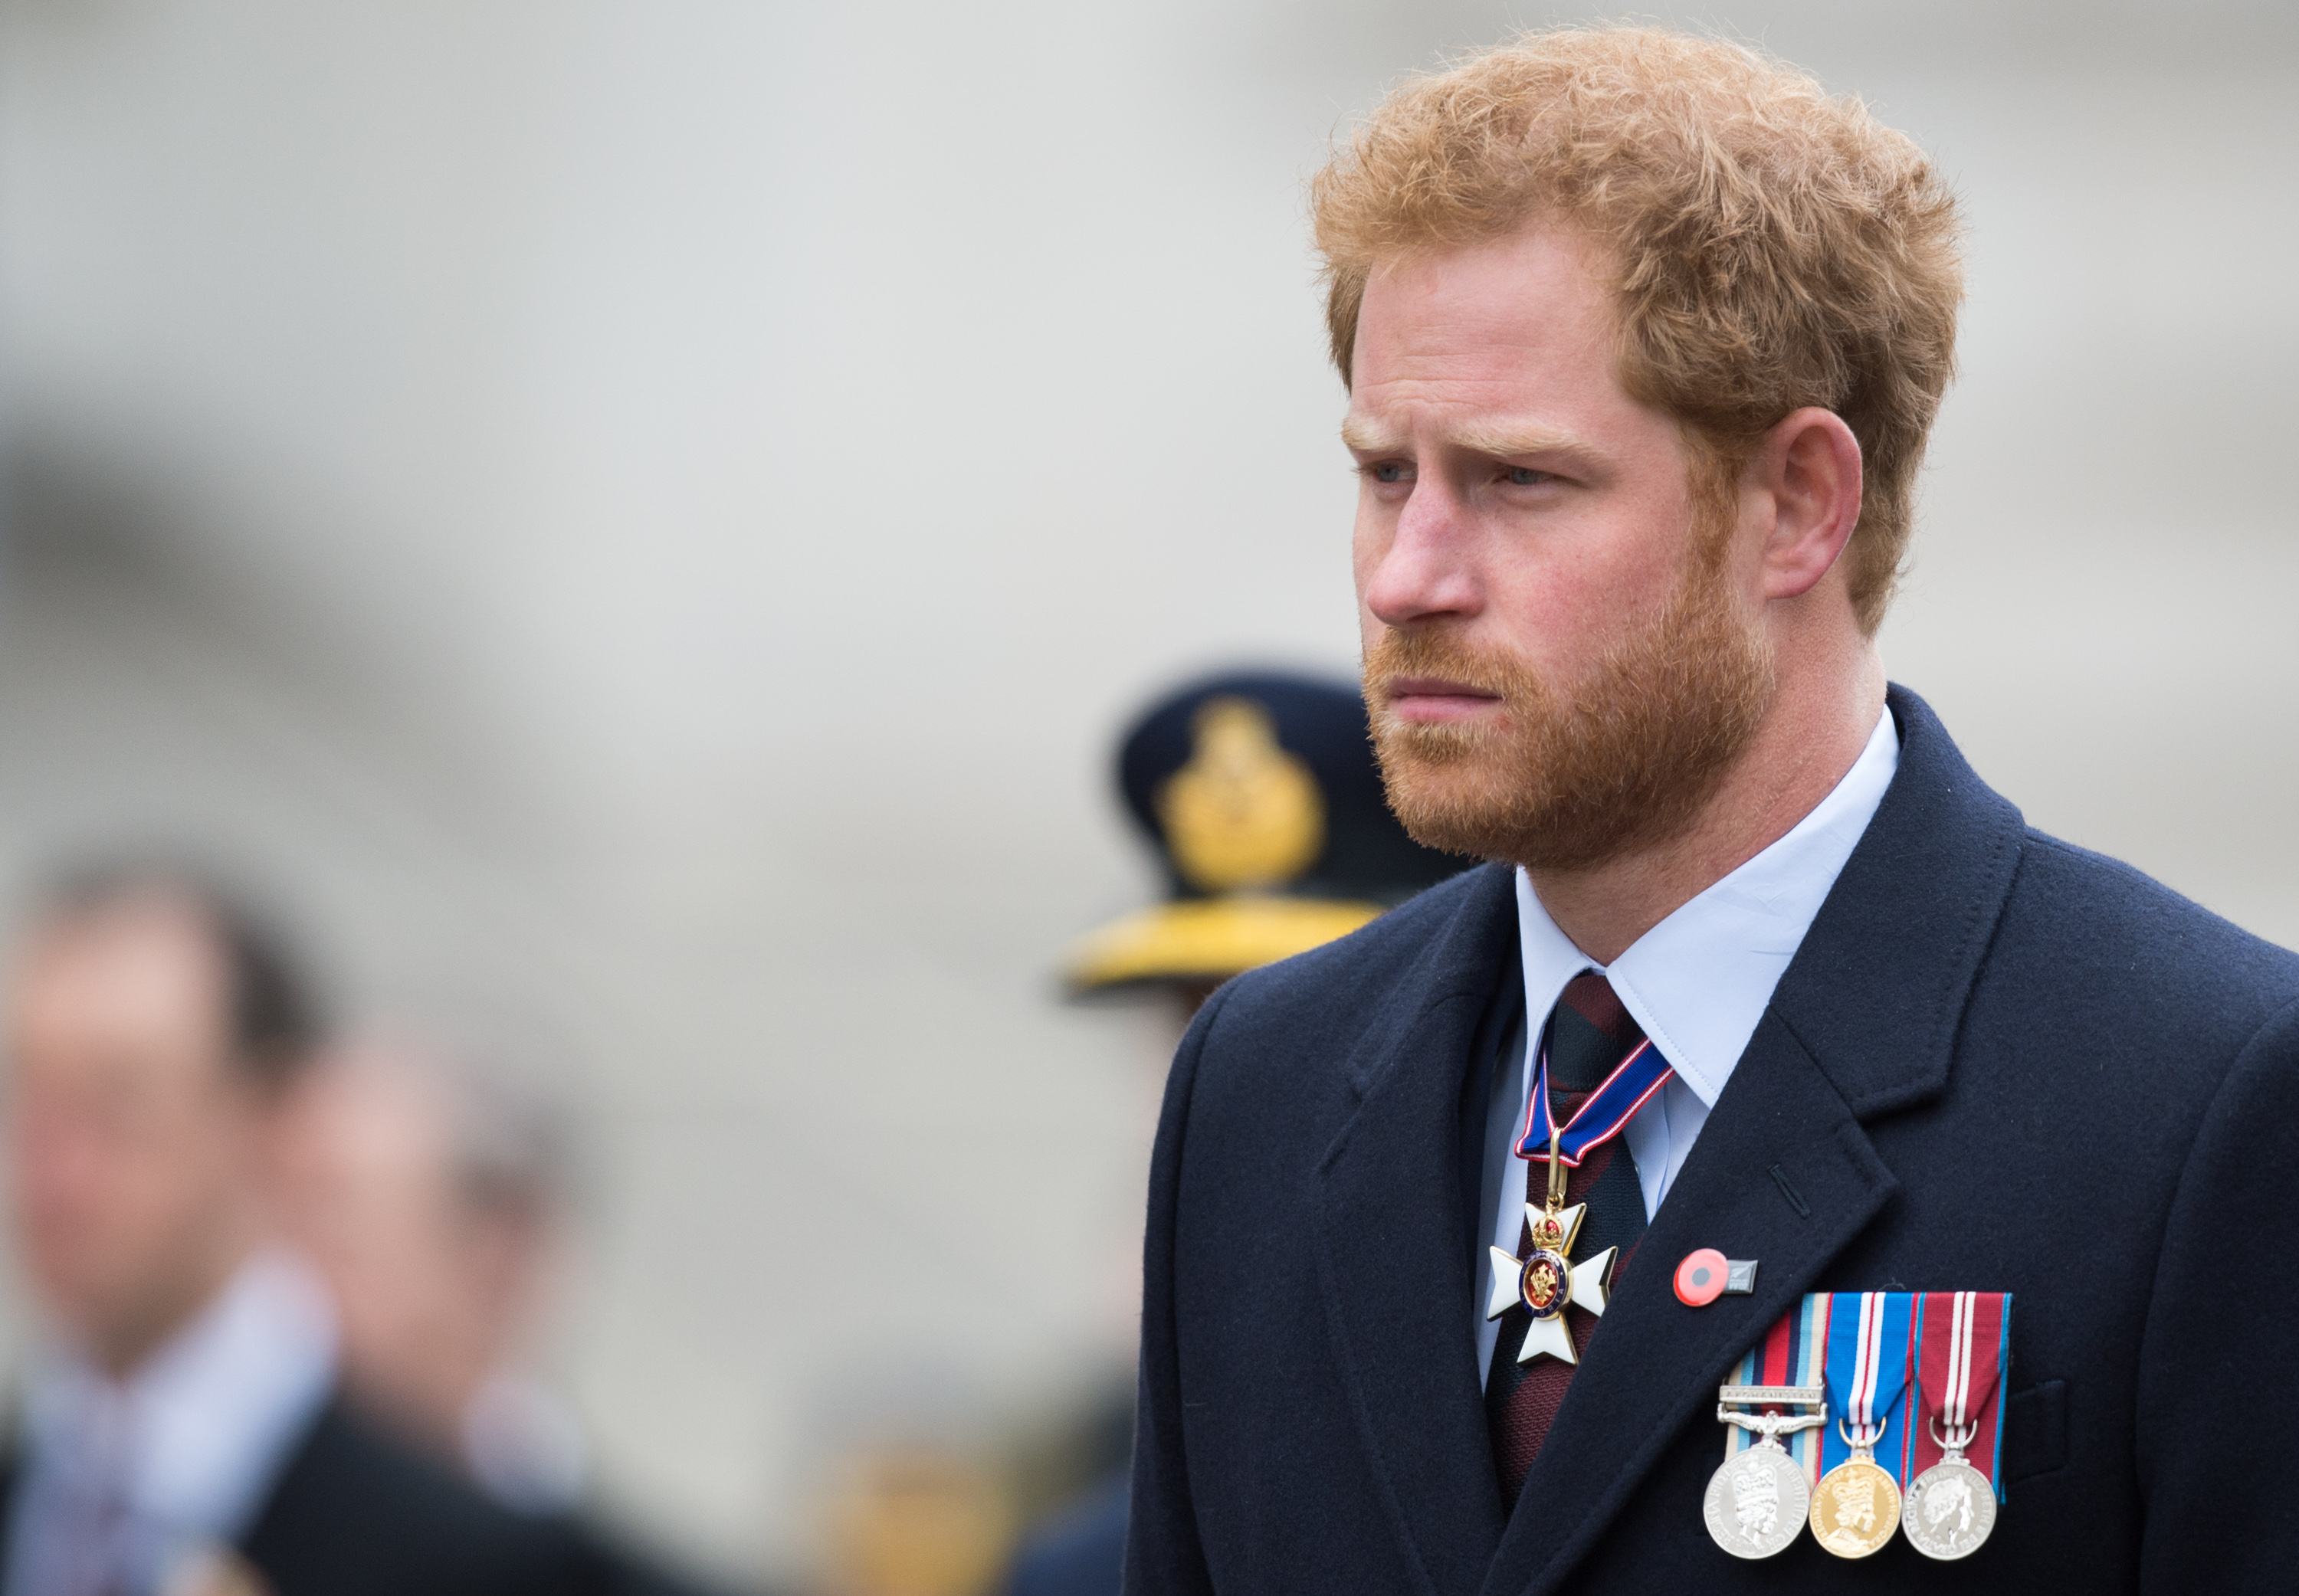 Prince Harry at the ANZAC Service at The Cenotaph on April 25, 2016, in London, England | Source: Getty Images